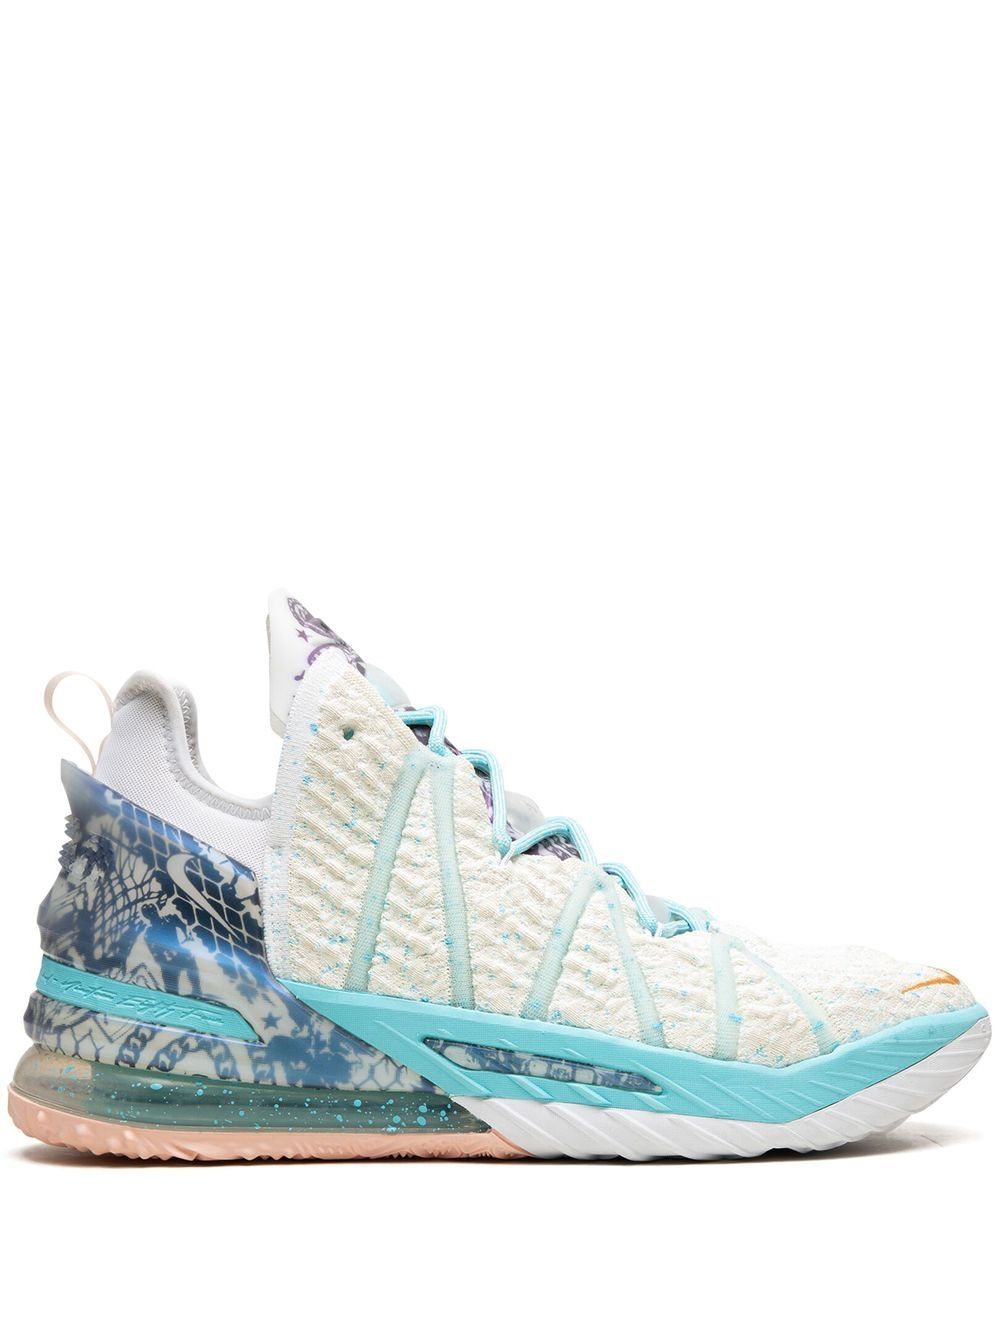 Nike Lebron 18 Reflections Flip Sneakers In White